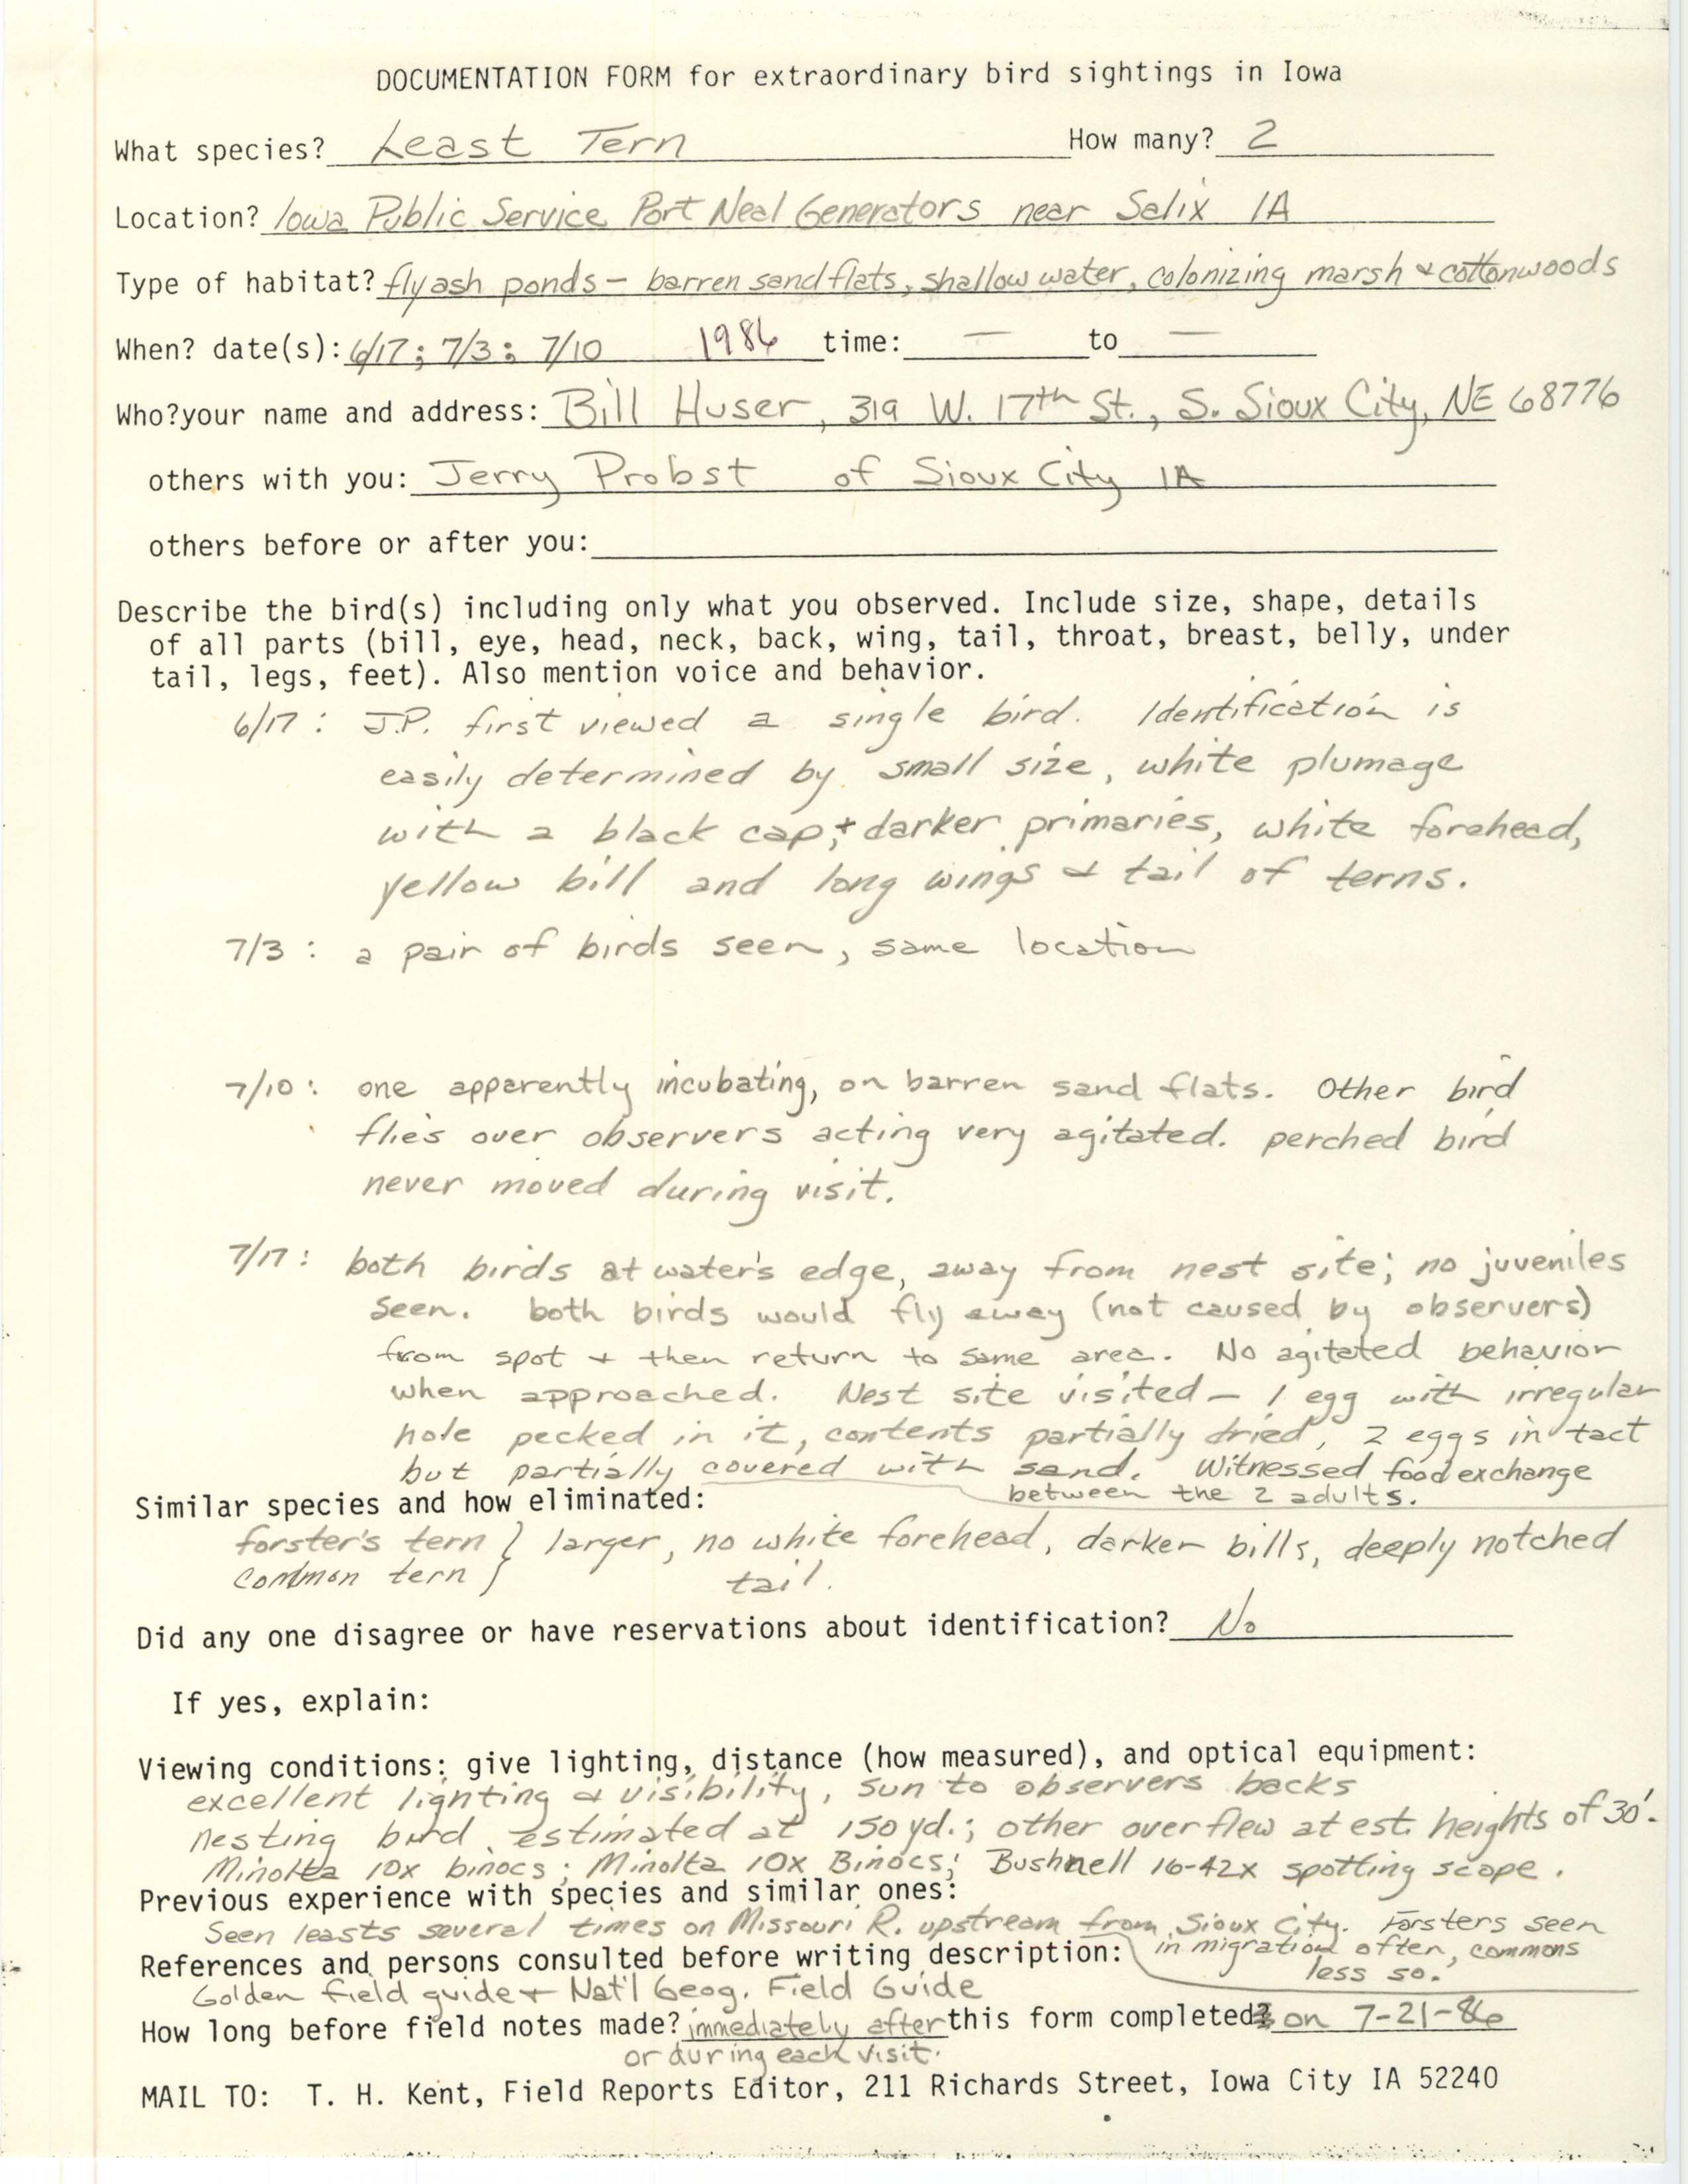 Documentation form for extraordinary bird sightings in Iowa, Least Tern, June 17, July 3 and 10, 1986  